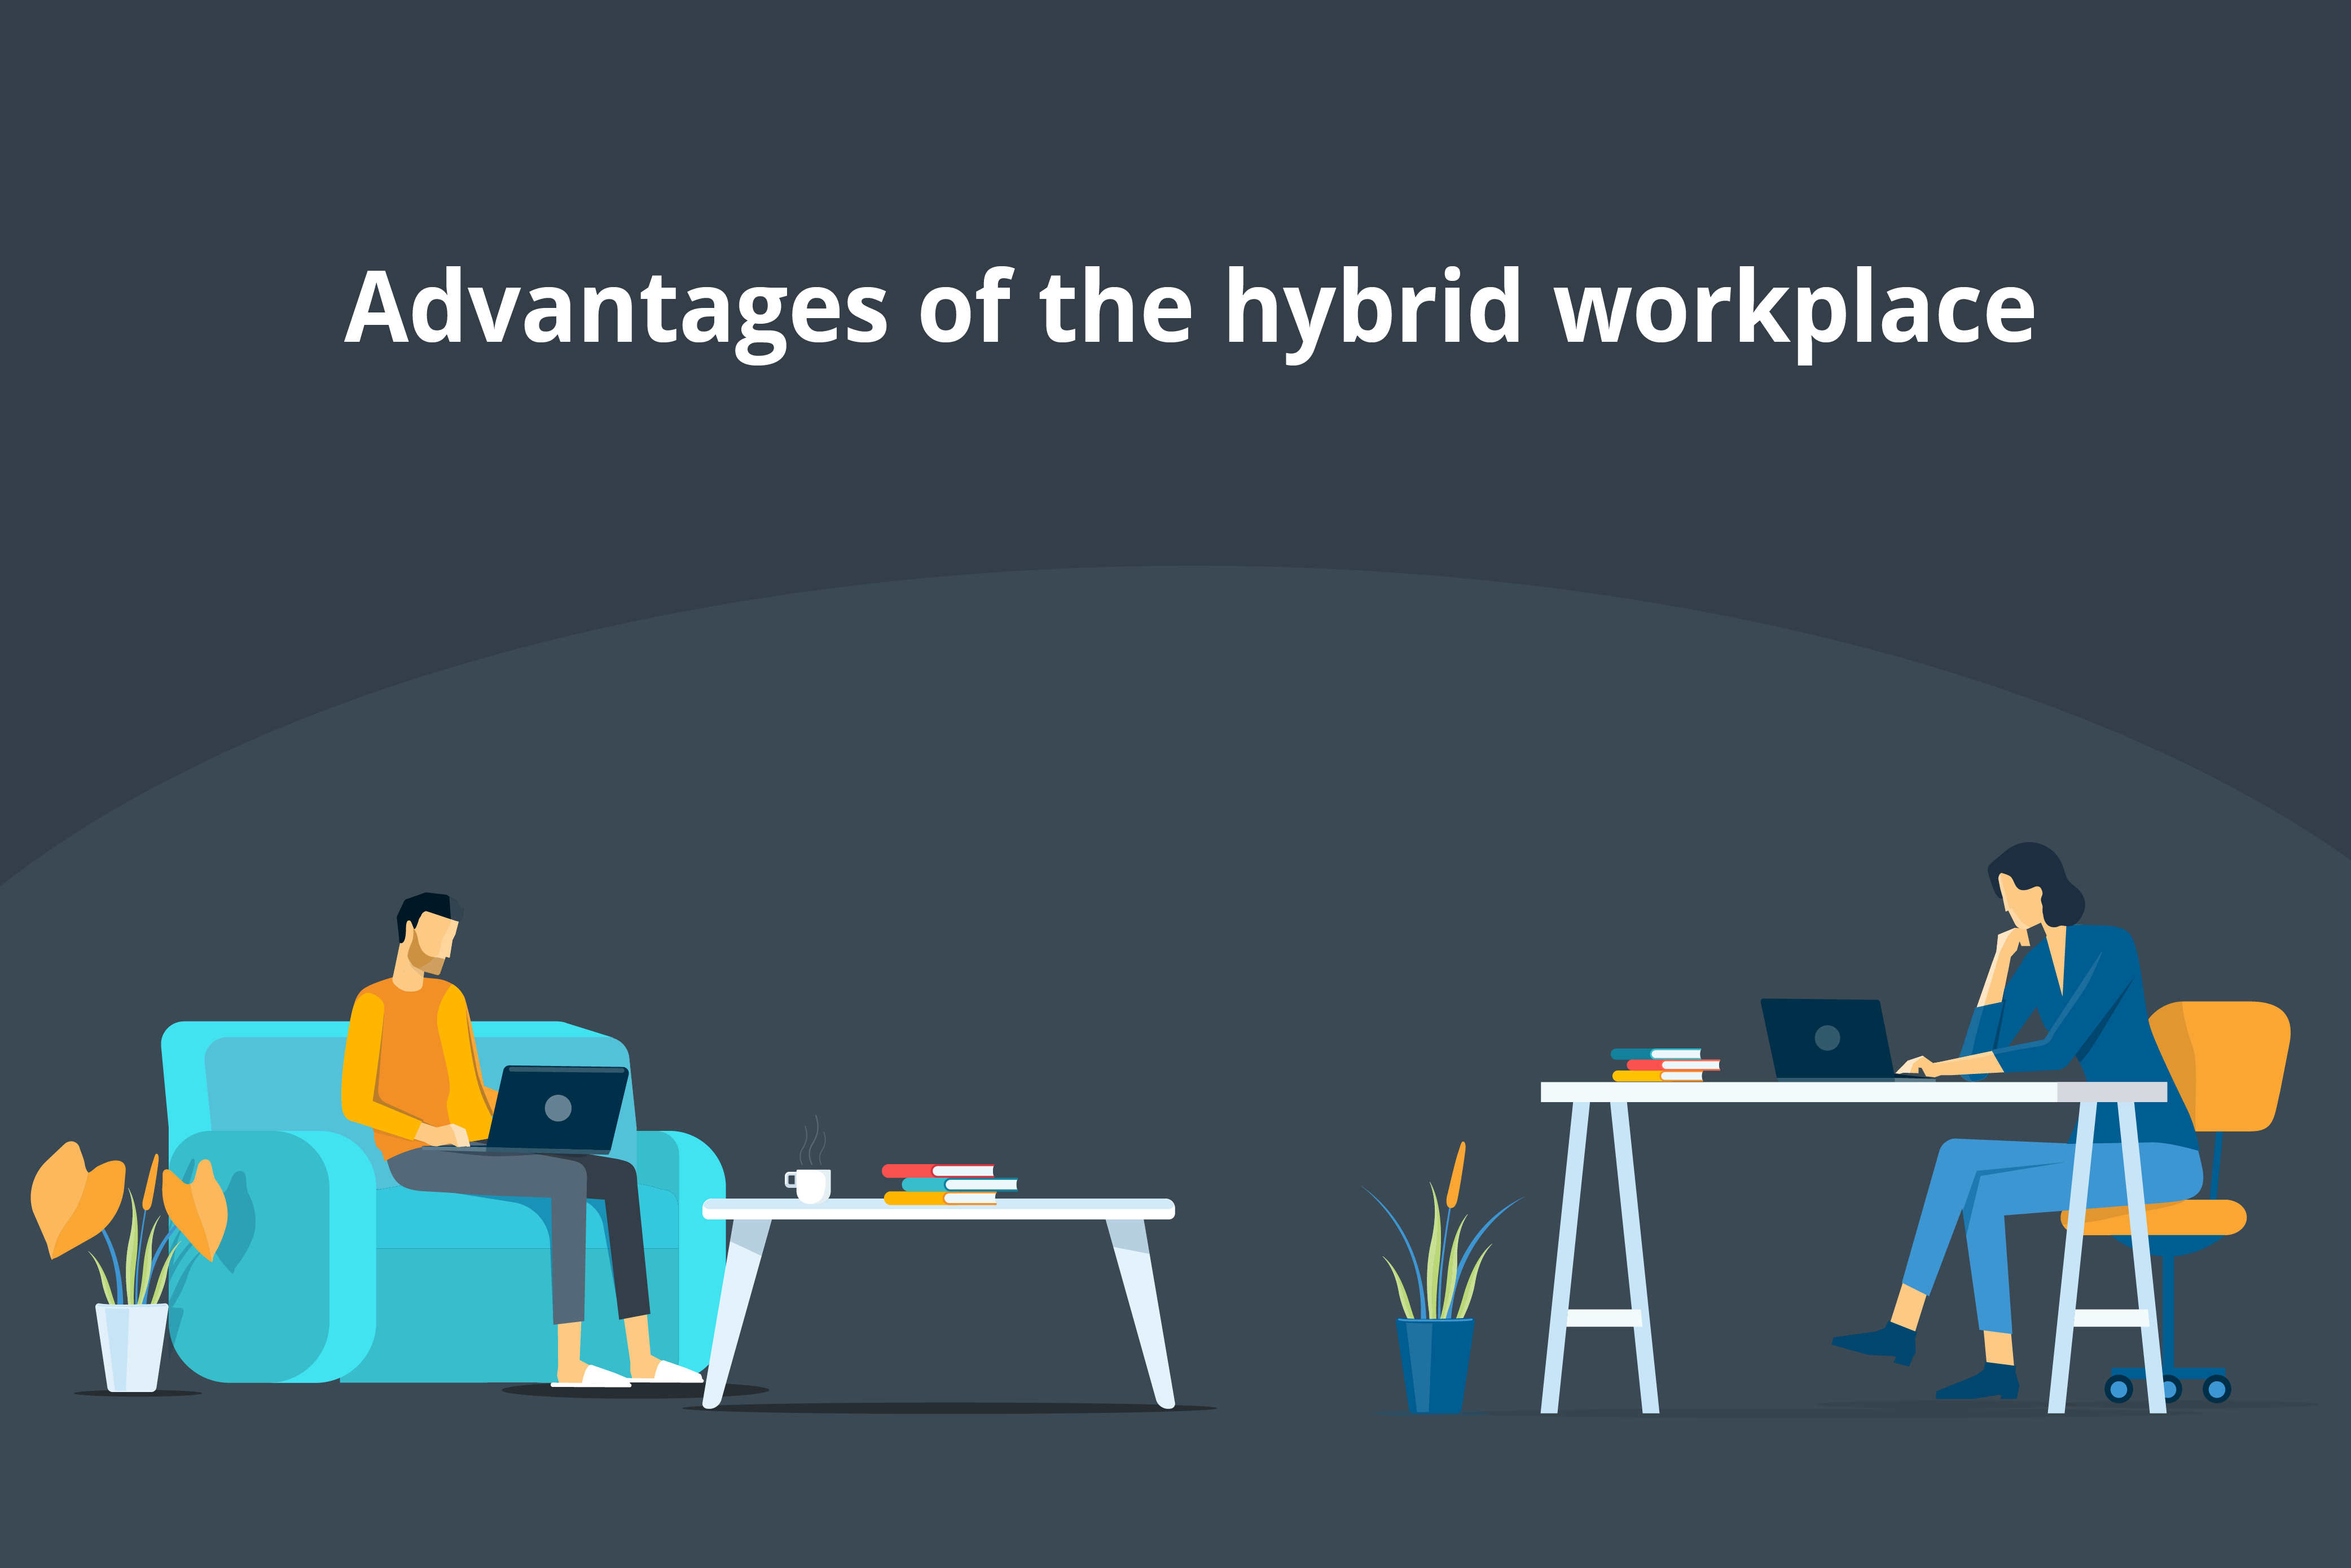 An employee works at their desk in office and another employee works from home.